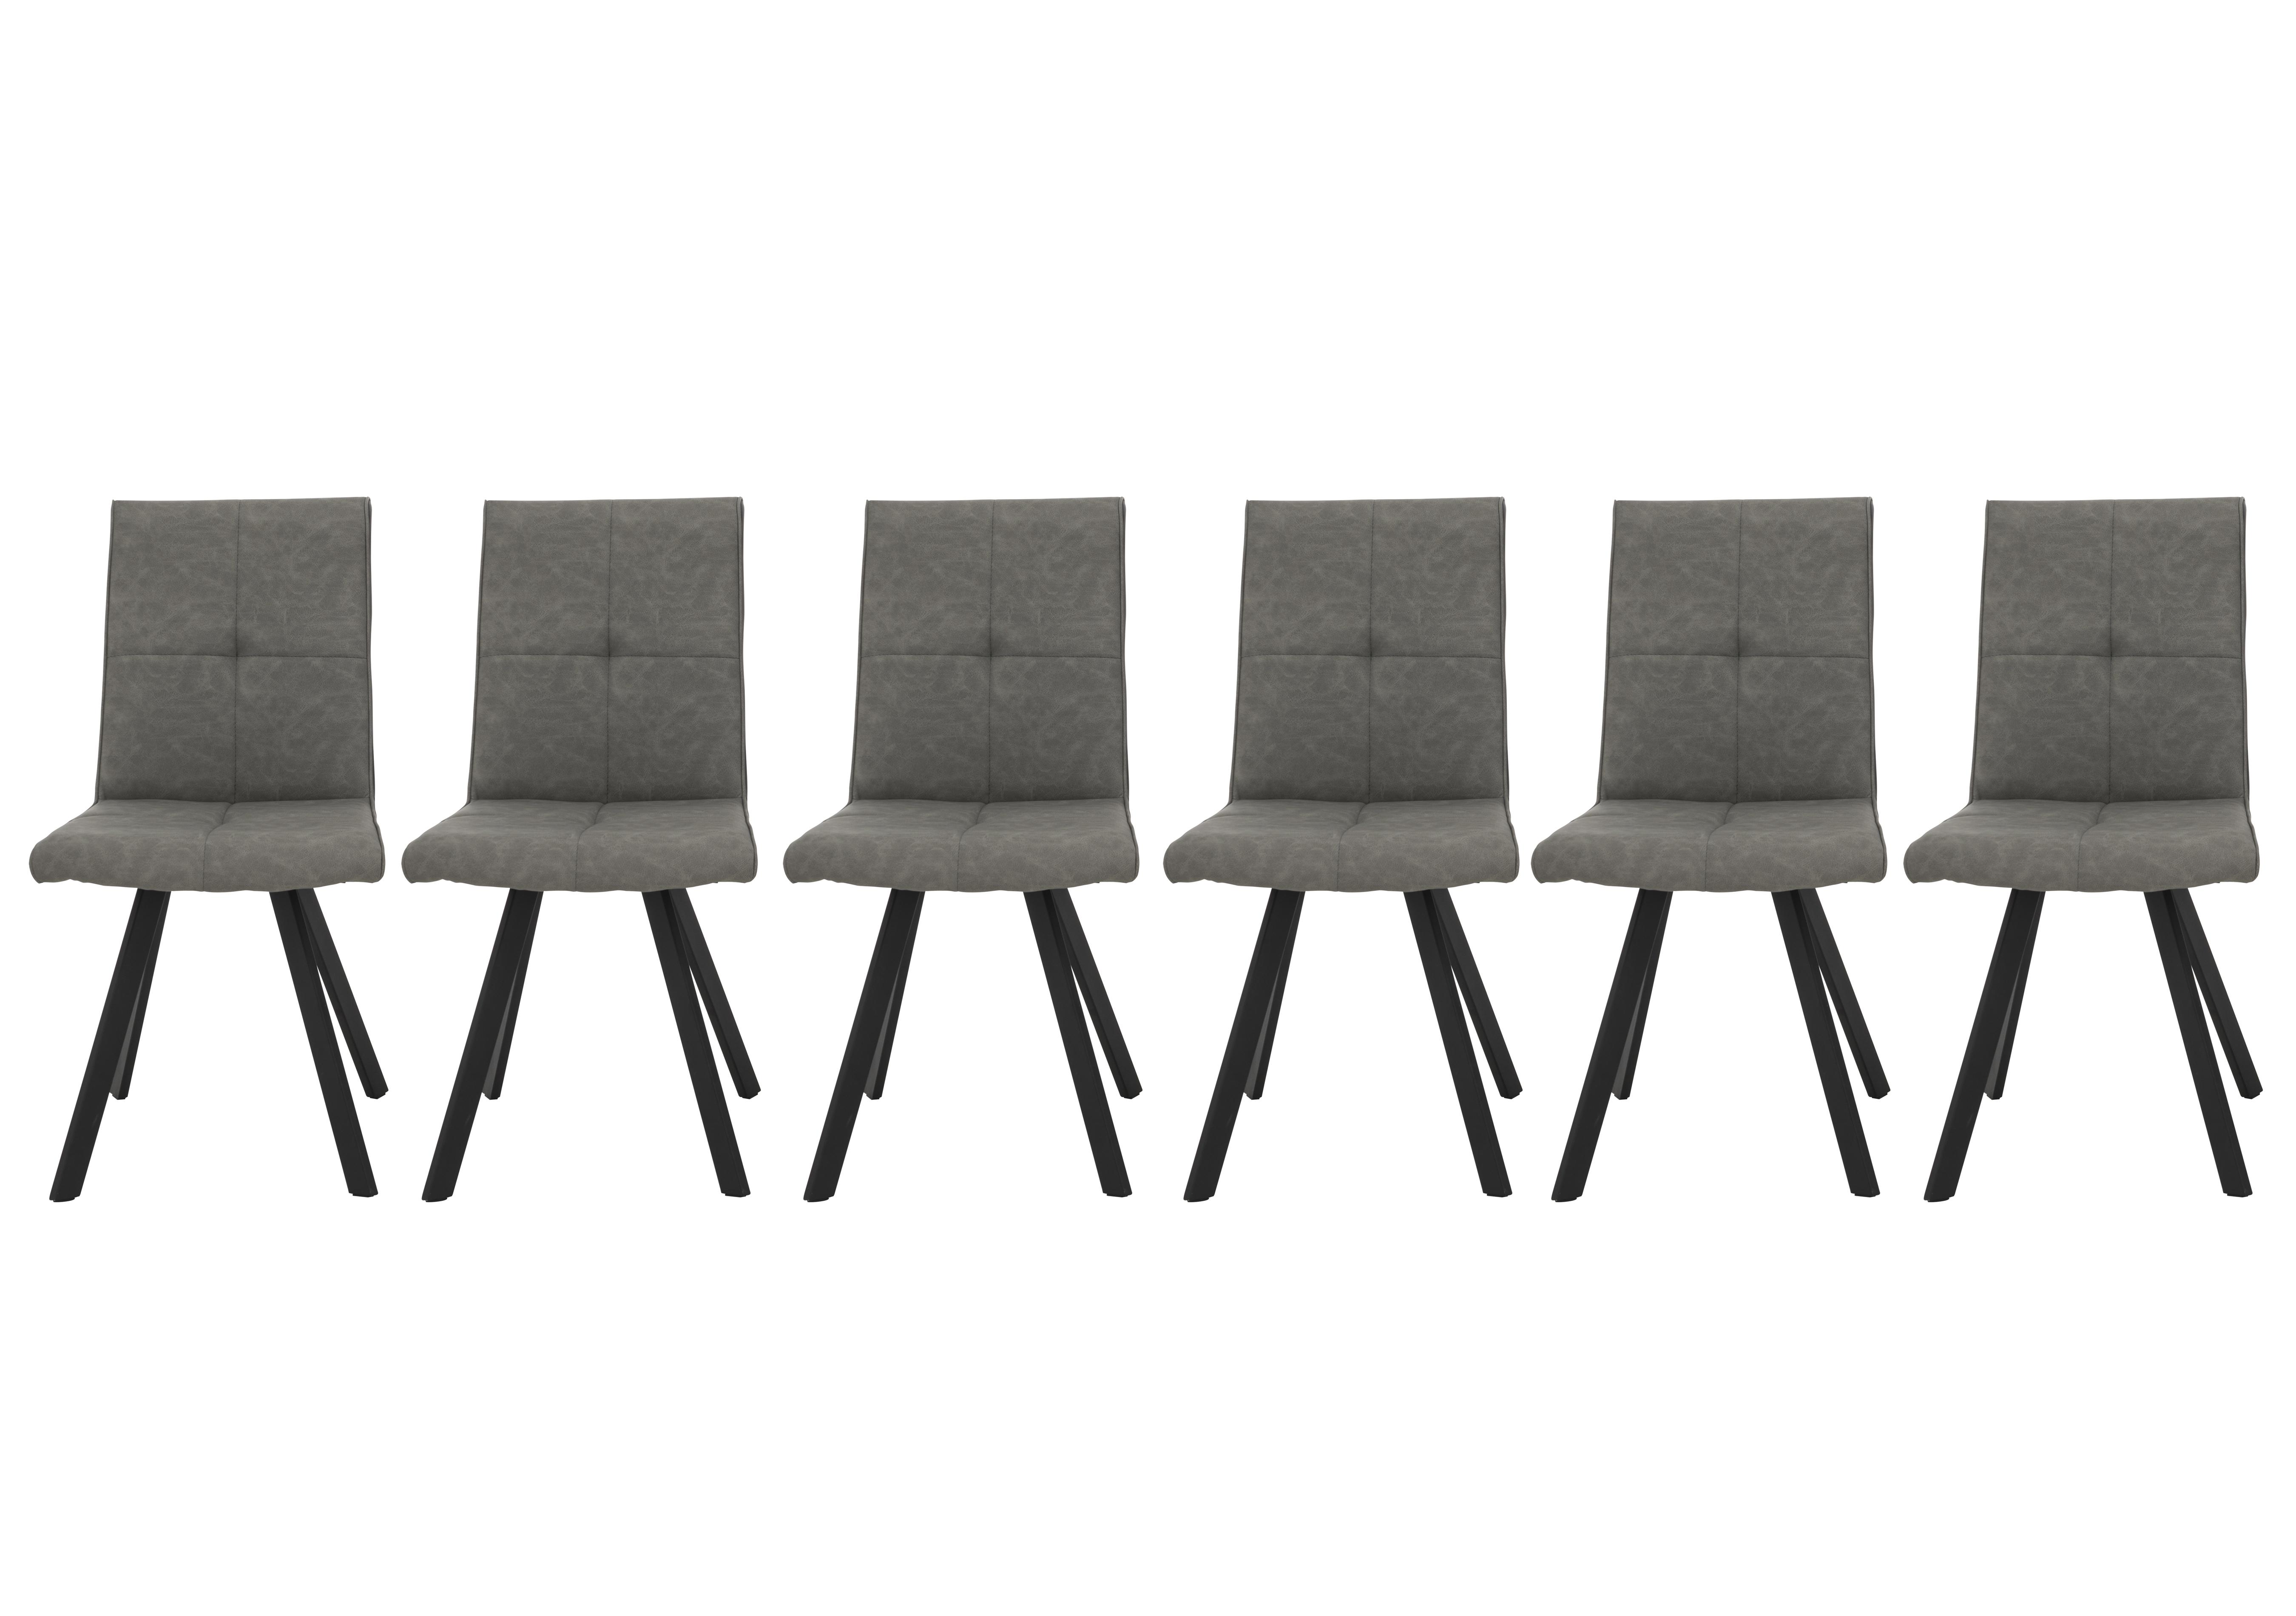 Phoenix Set of 6 Dining Chairs in Two Tone on Furniture Village